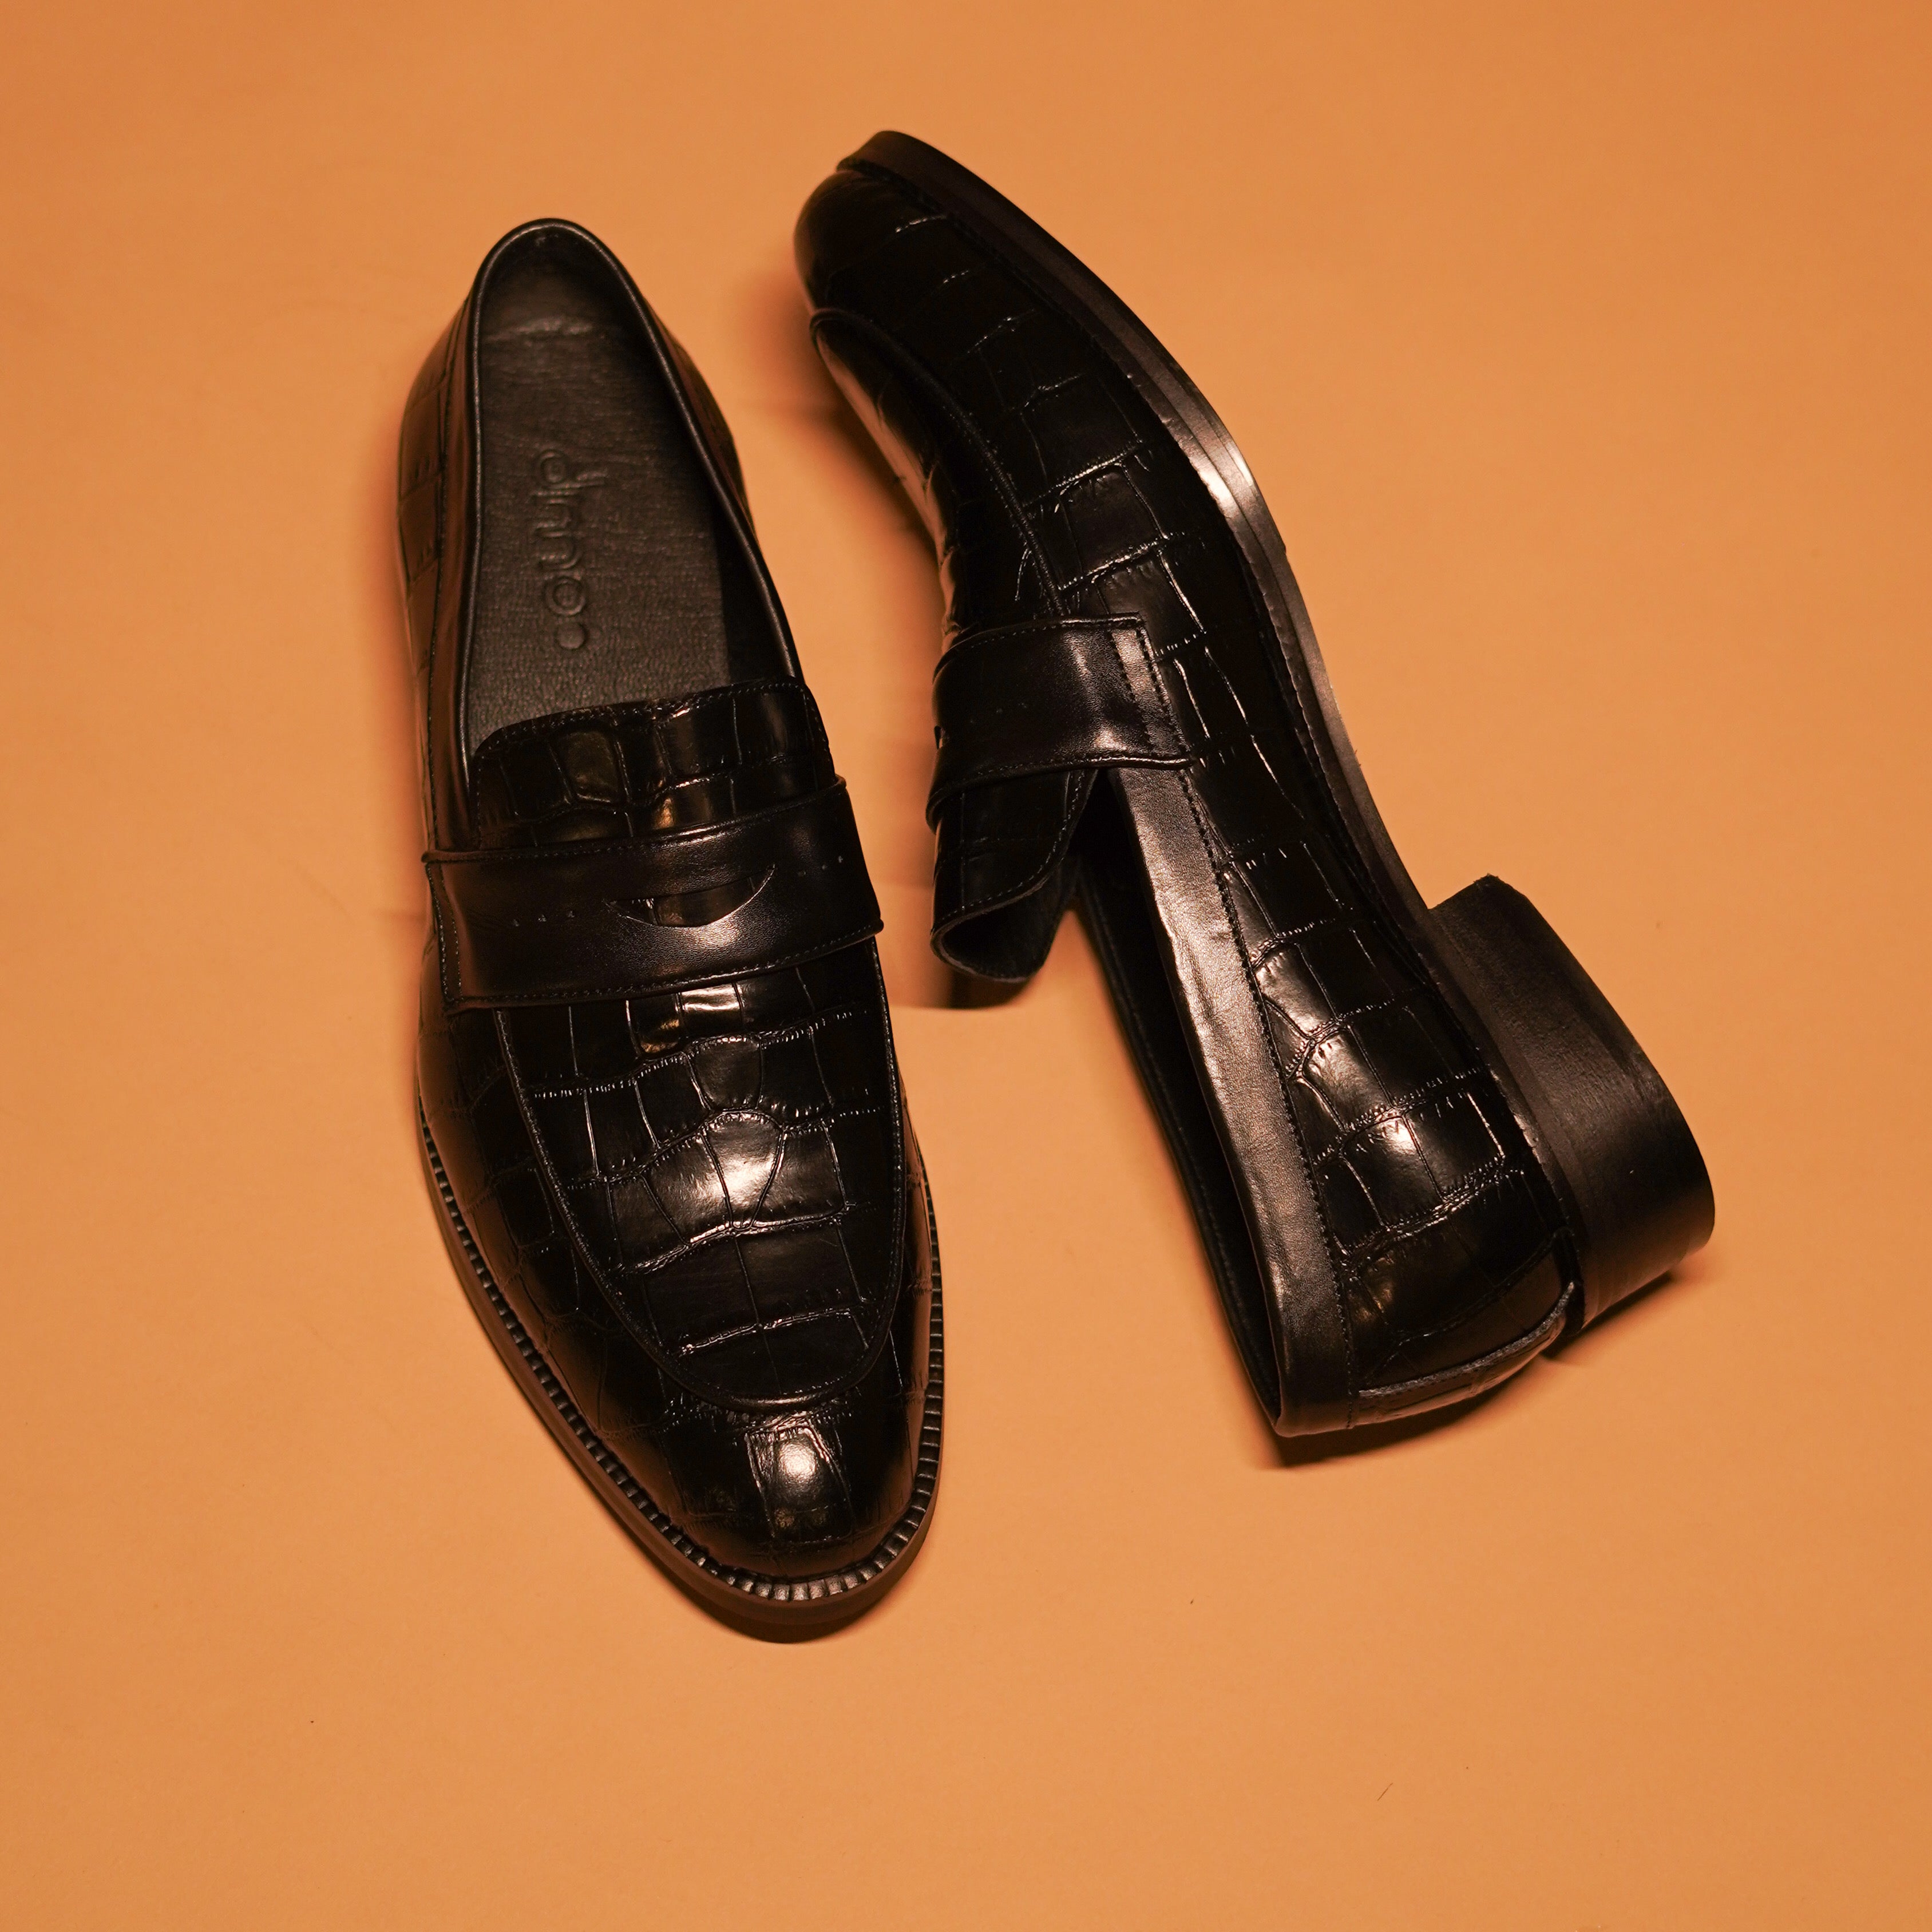 Motivo Crocco luxury crock print penny loafer with classic leather strap and round toe shape.